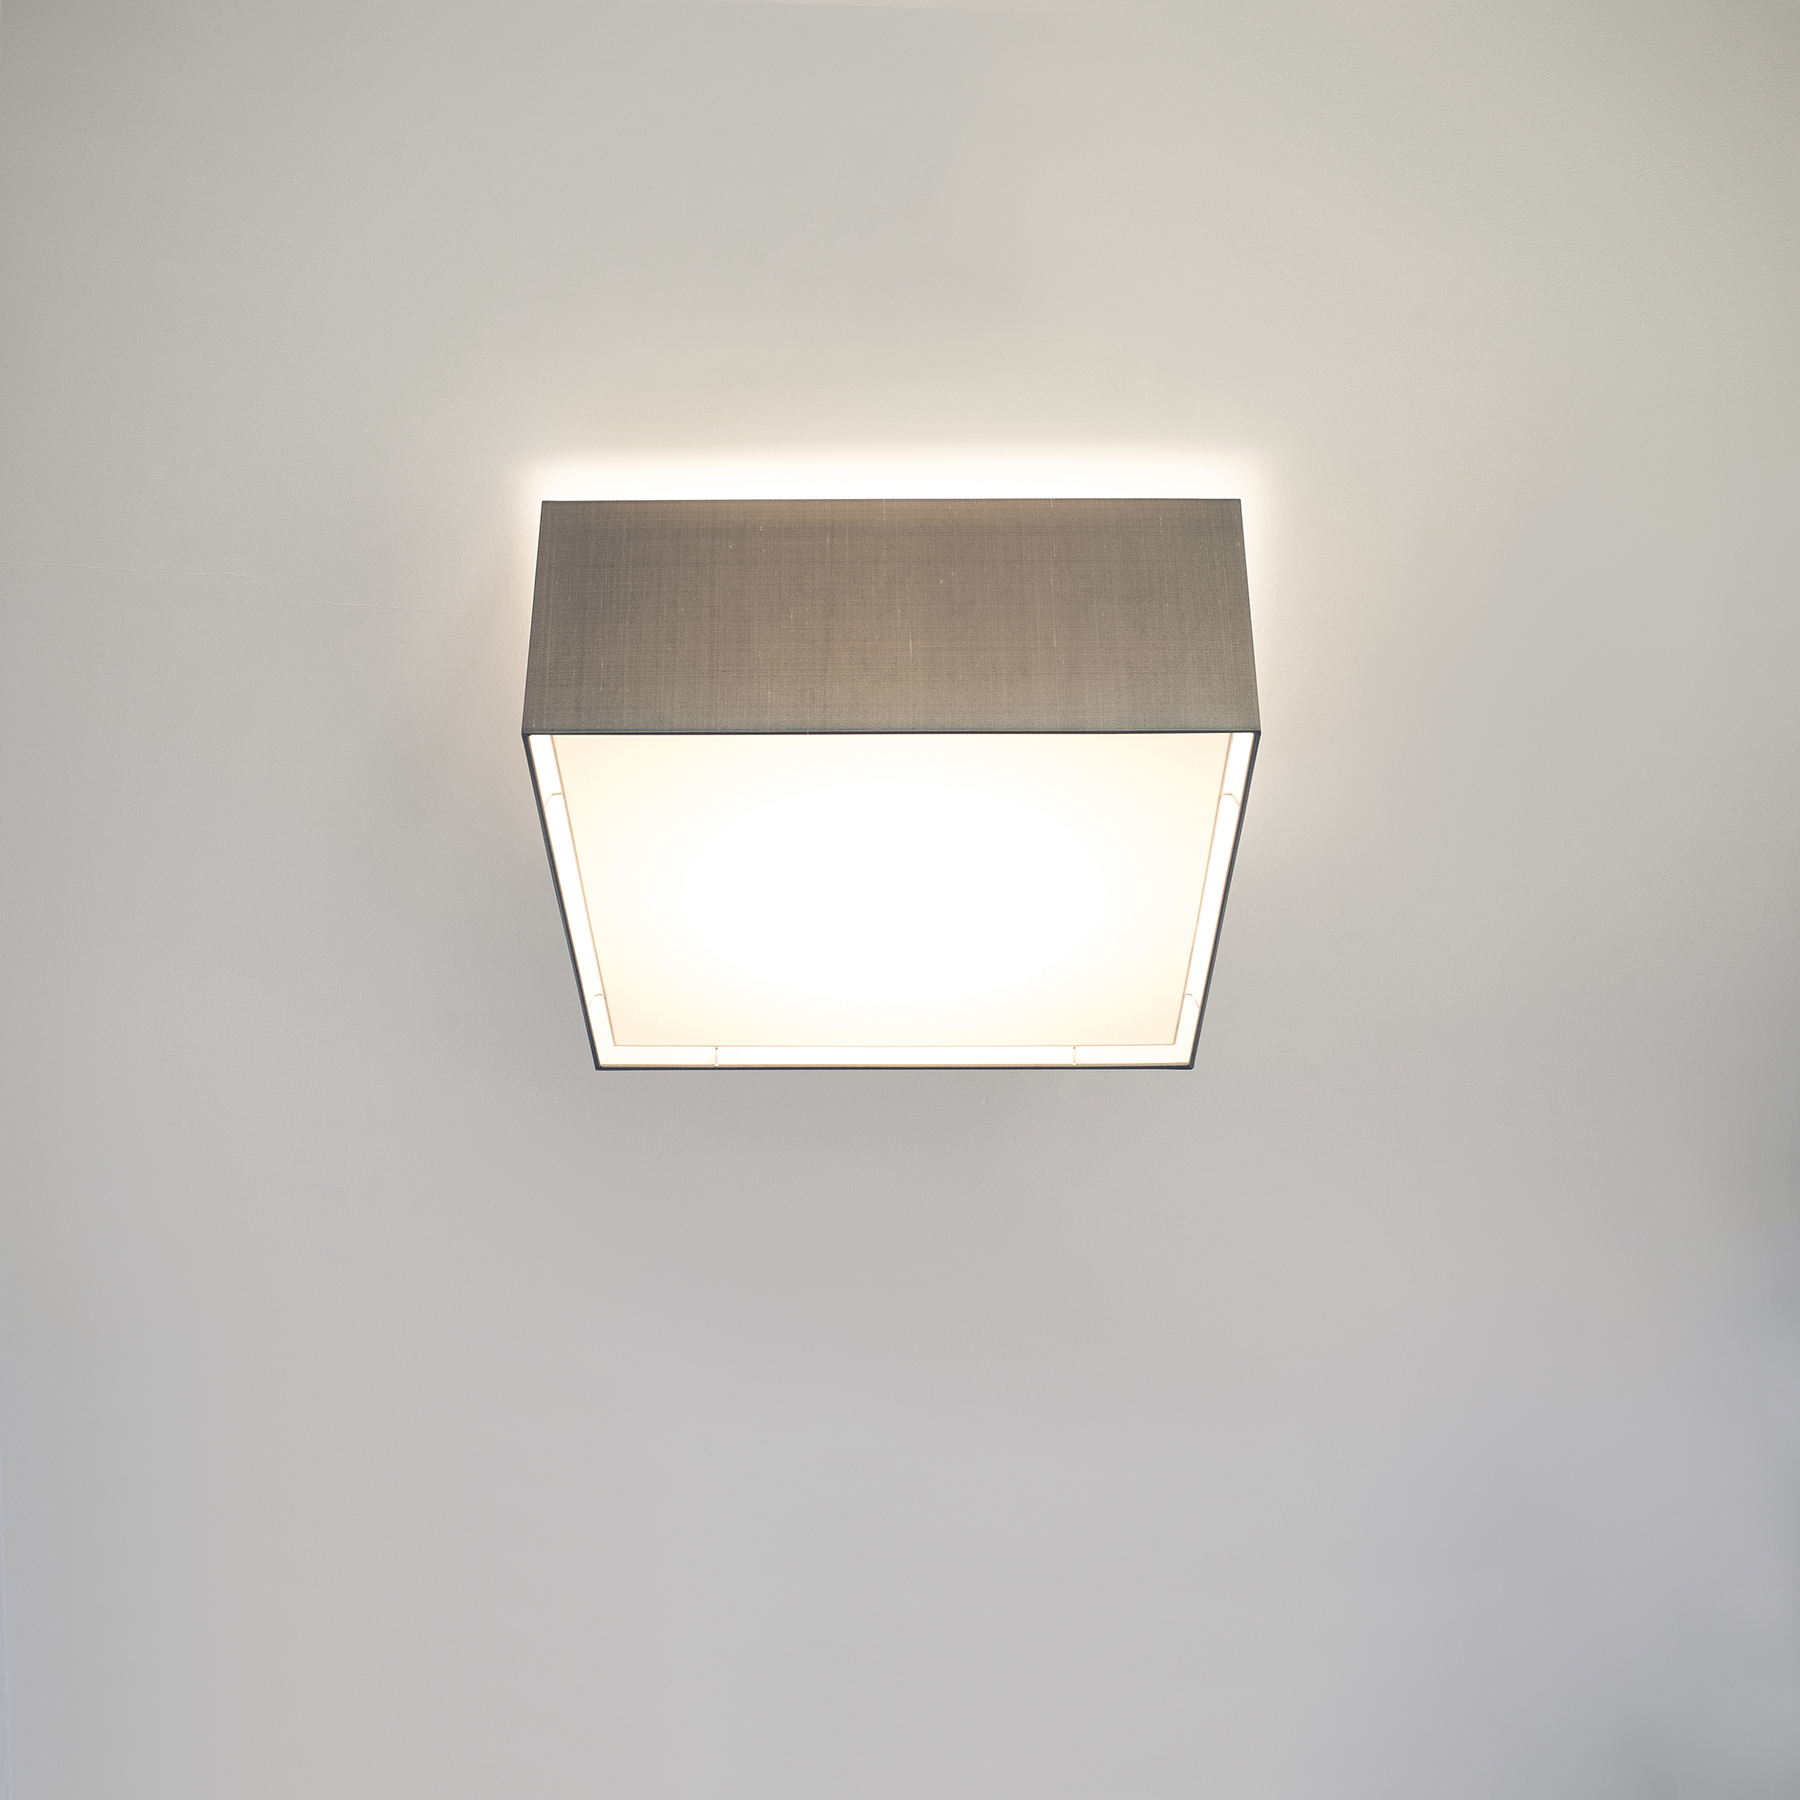 CUBIC FRAME ceiling light in silver-grey.